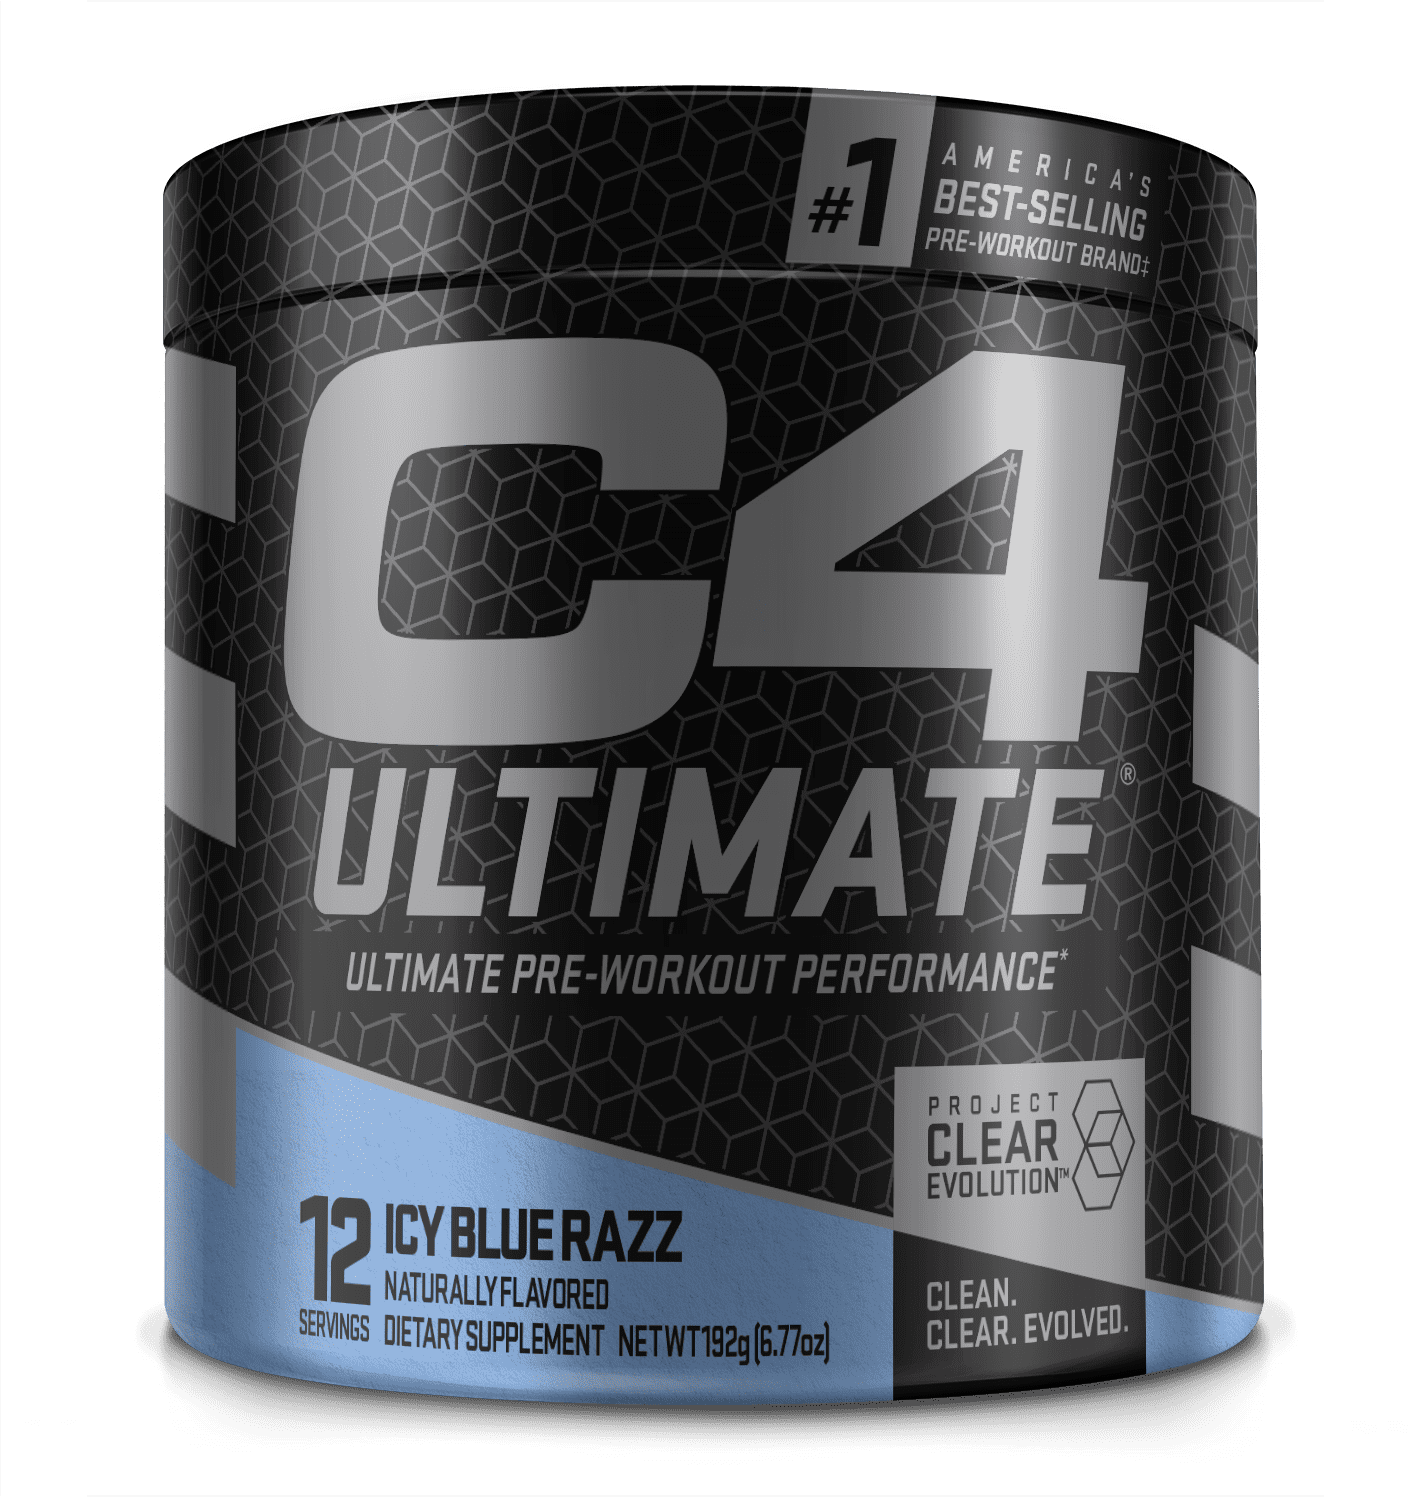 15 Minute C4 Pre Workout Caffeine Free for Burn Fat fast